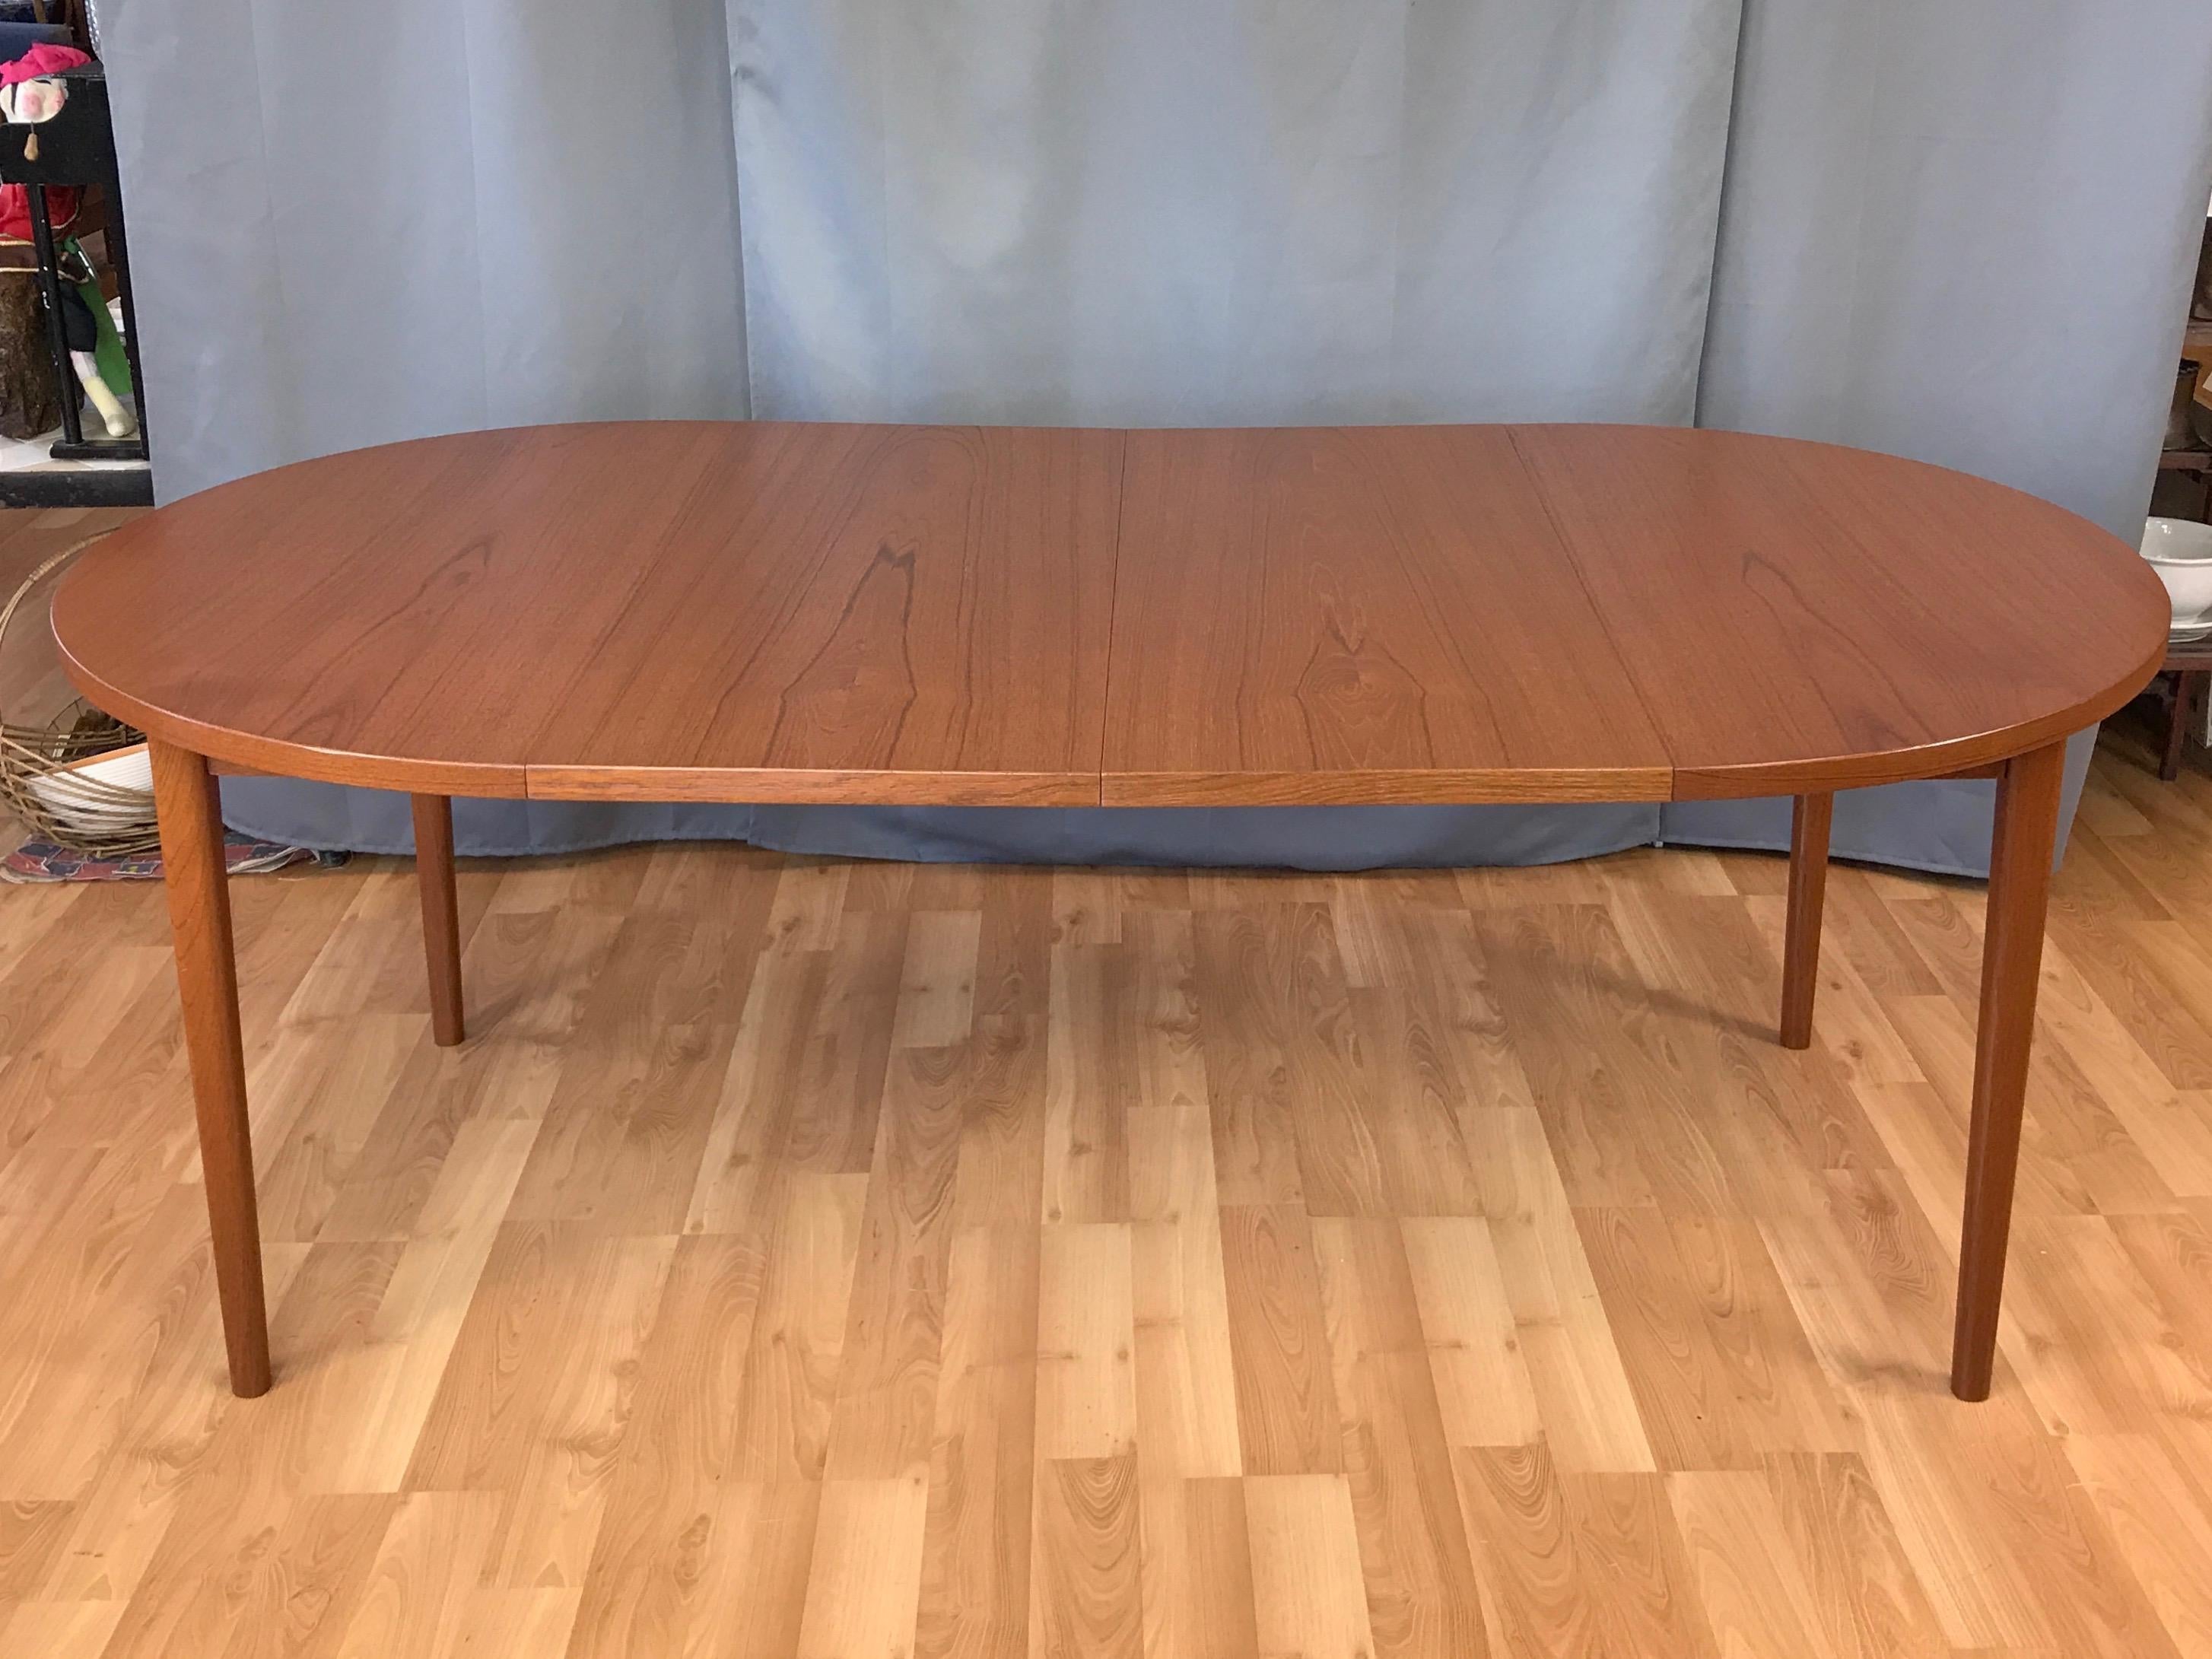 A 1960s Danish modern extendable teak dining table with two leaves.

Super clean lines with a very nicely figured matched grain top. Solid teak rounded square legs with a slight taper. A handsome design equally at home in a vintage, Scandinavian